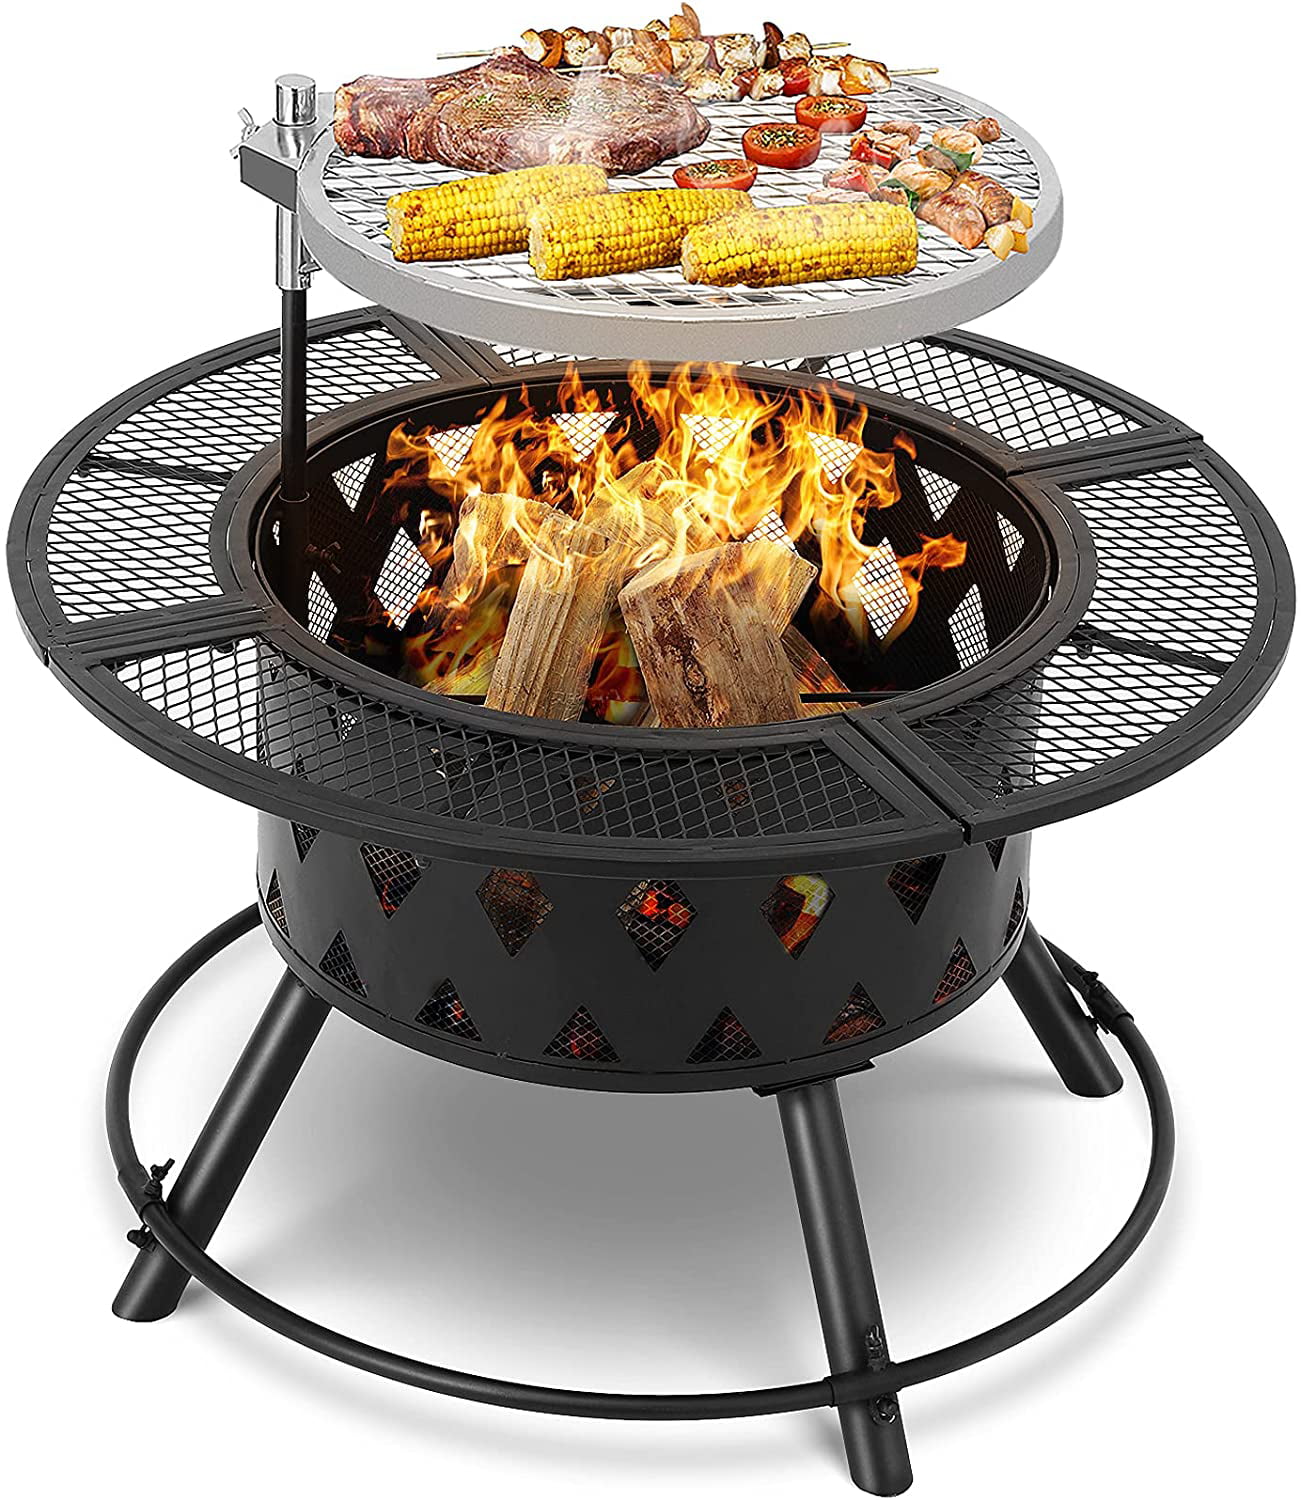 Titan Great Outdoors 32 Steel Fire, Rockwood Steel Insert And Cooking Grate For Ring Fire Pit